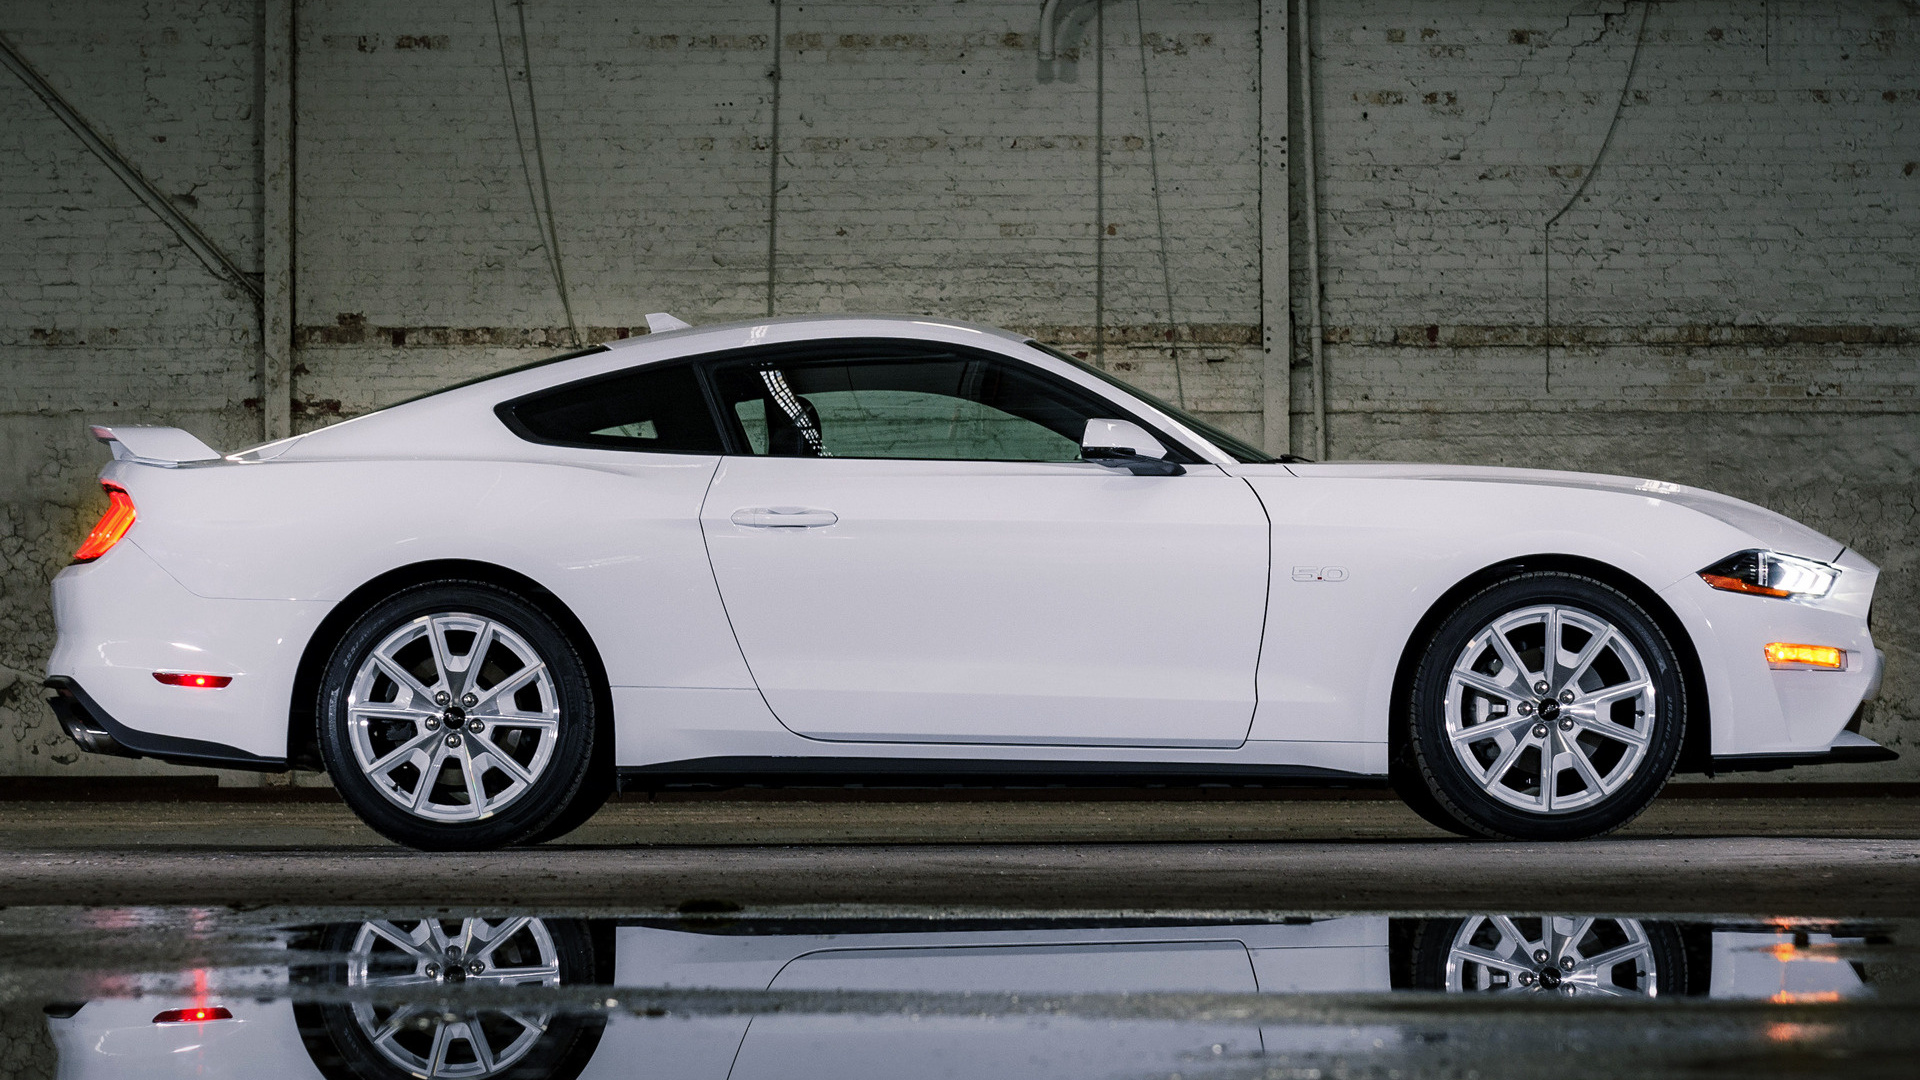 2022 Ford Mustang GT Ice White Appearance Package and HD Image